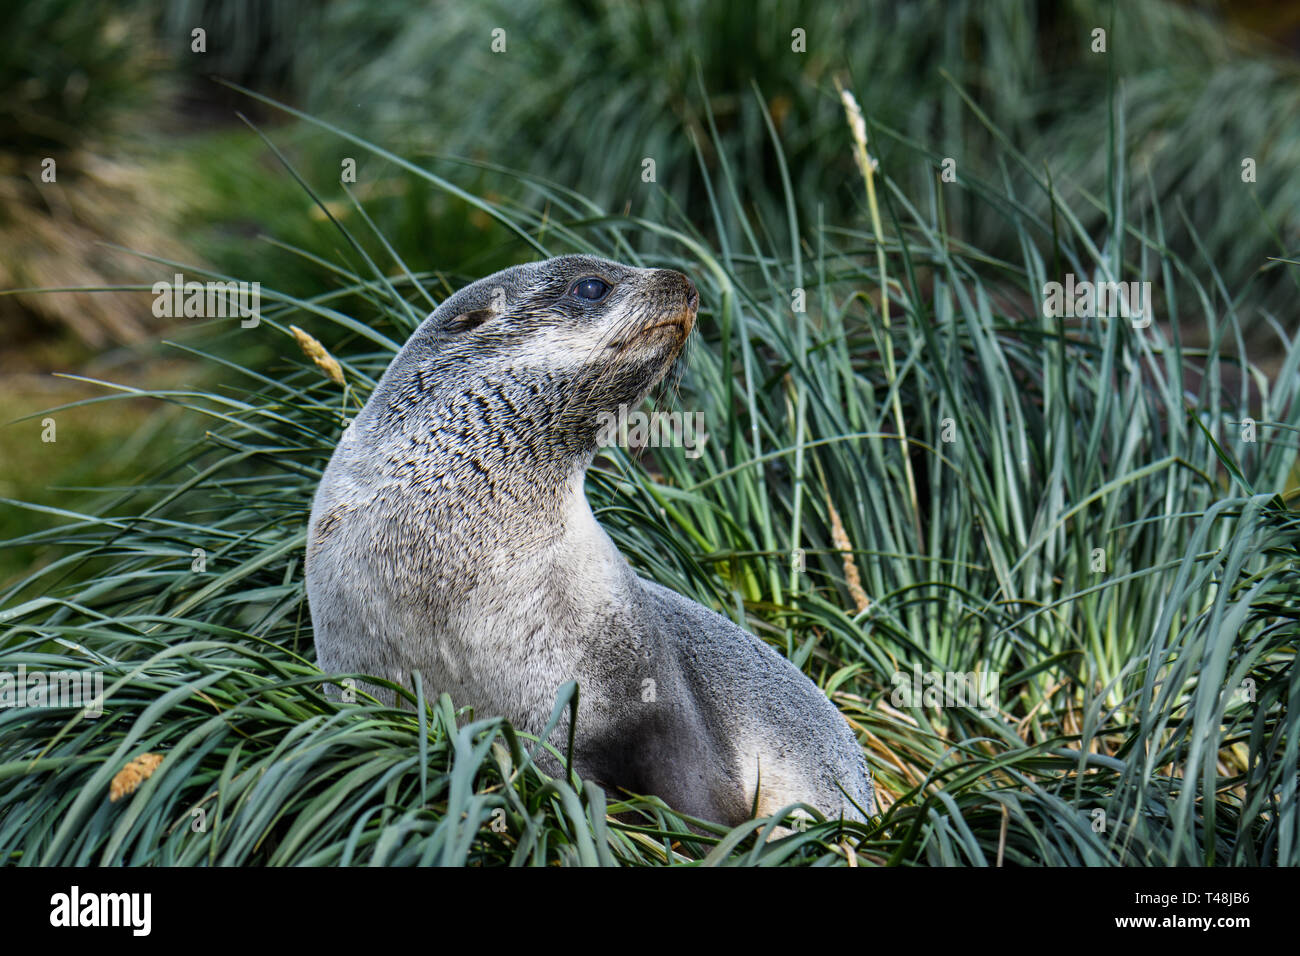 Female fur seal sitting and watching on a mound of native Tussac Grass in Jason Harbor, South Georgia Stock Photo